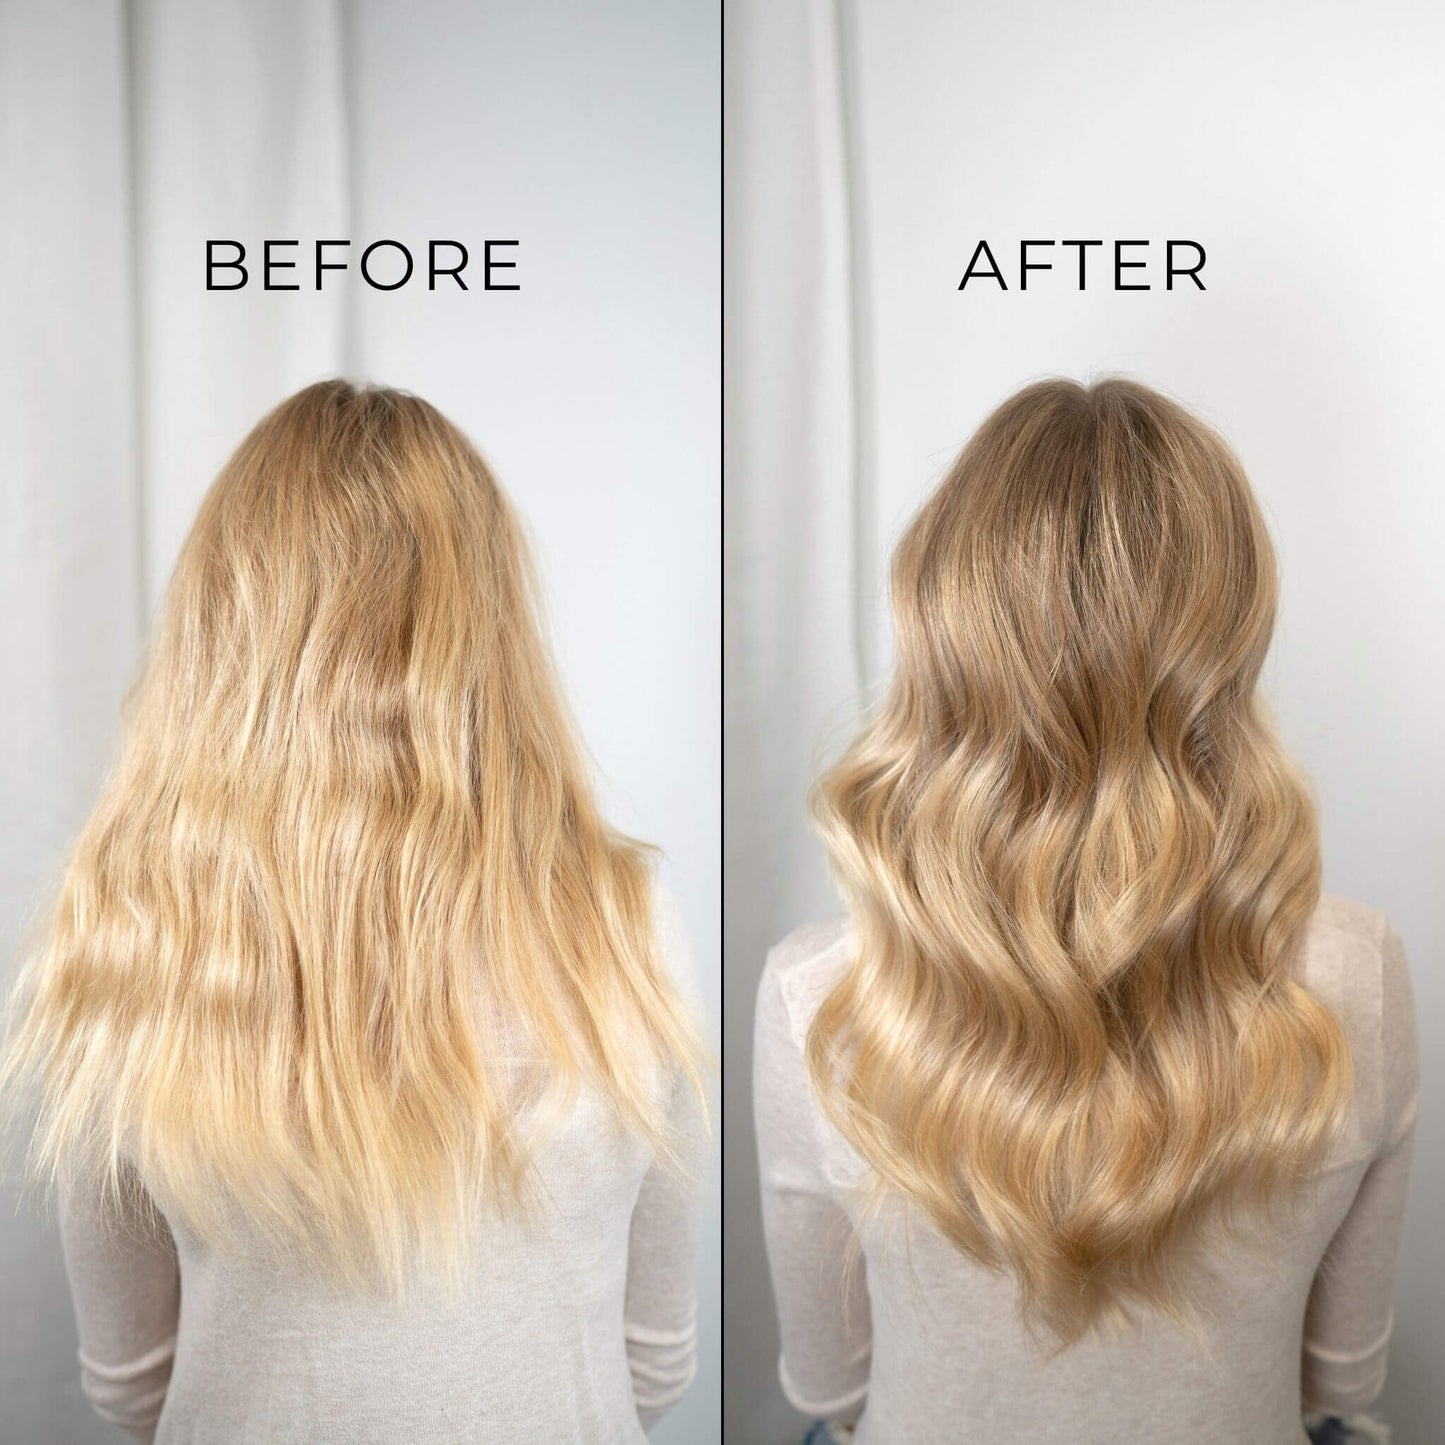 Before and after using TYME Iron Pro: Aura on woman with long blonde hair.